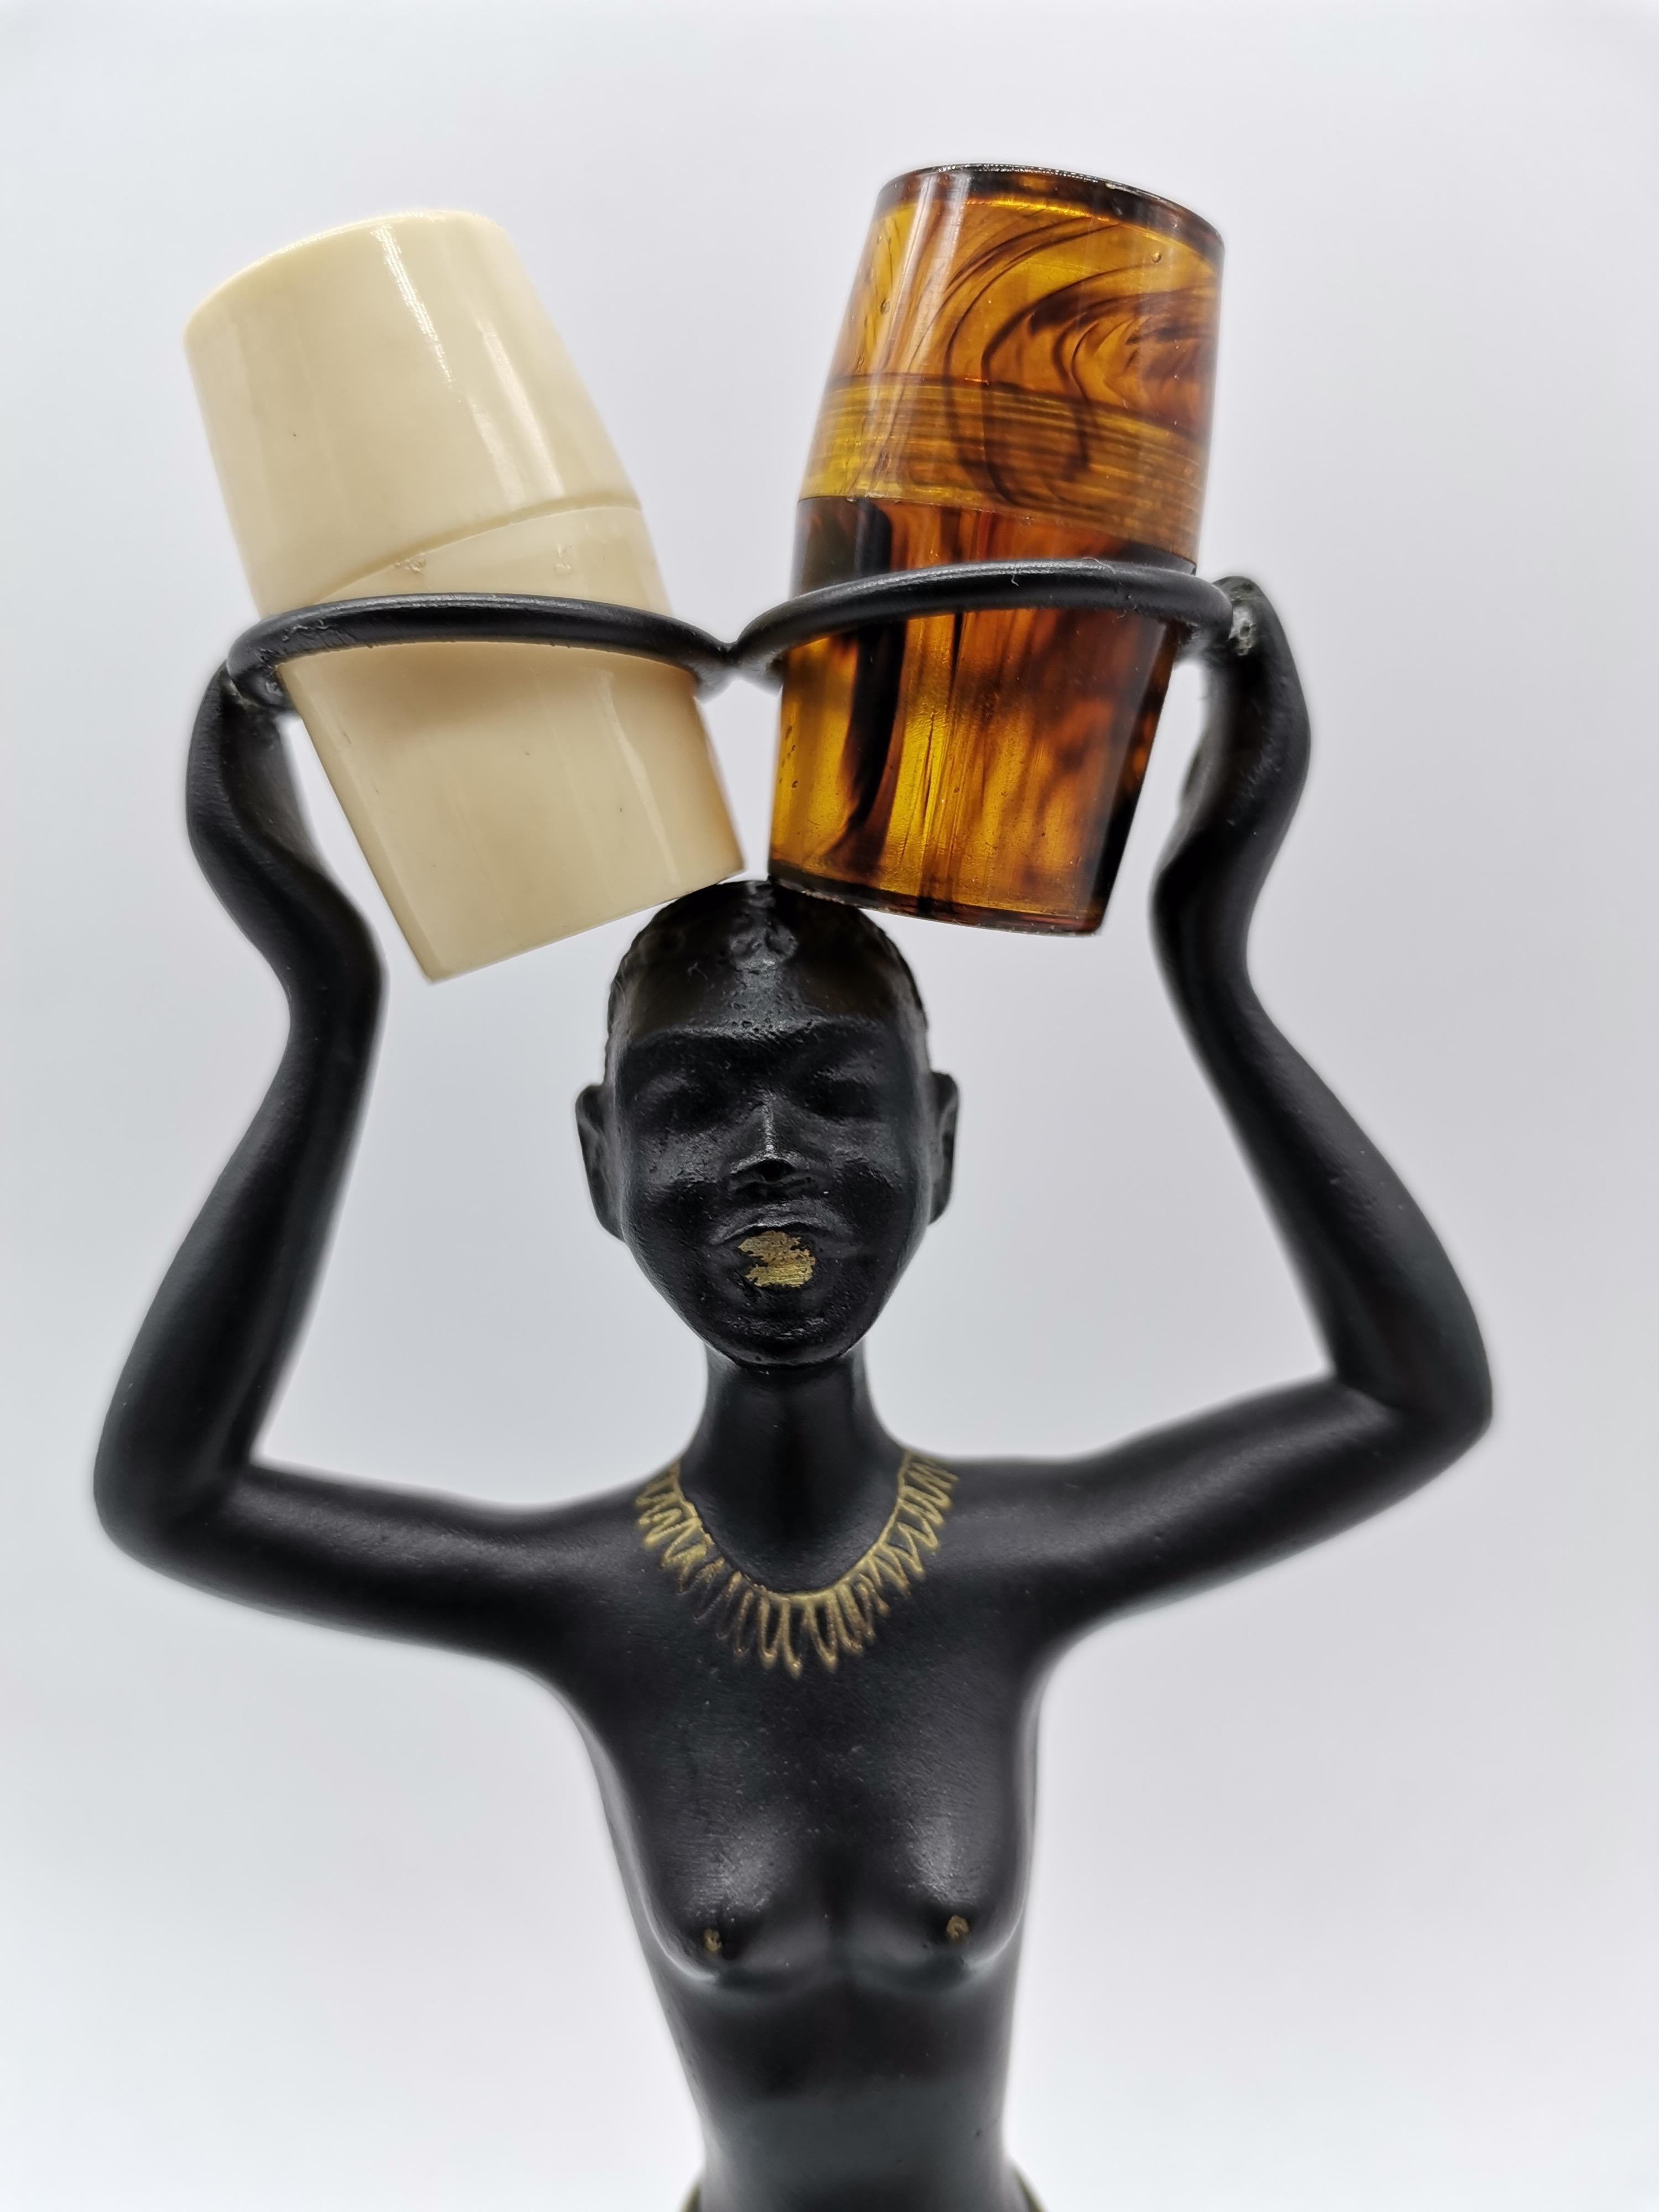 Salt and Pepper Shaker holder in form of an african woman. In style of Richard Rohac. Shakers are made of plastic.